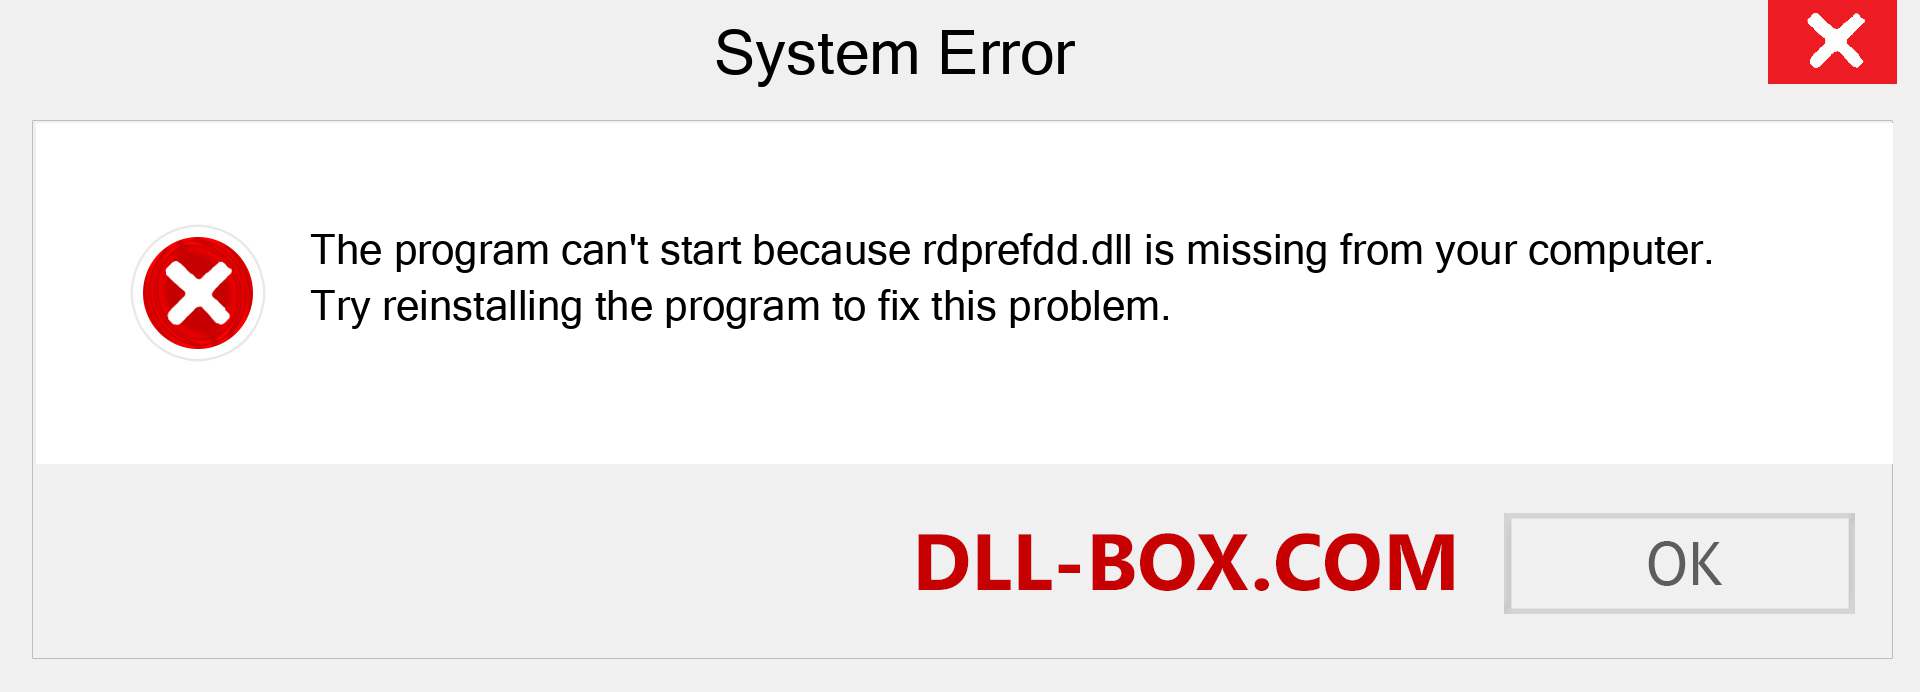  rdprefdd.dll file is missing?. Download for Windows 7, 8, 10 - Fix  rdprefdd dll Missing Error on Windows, photos, images